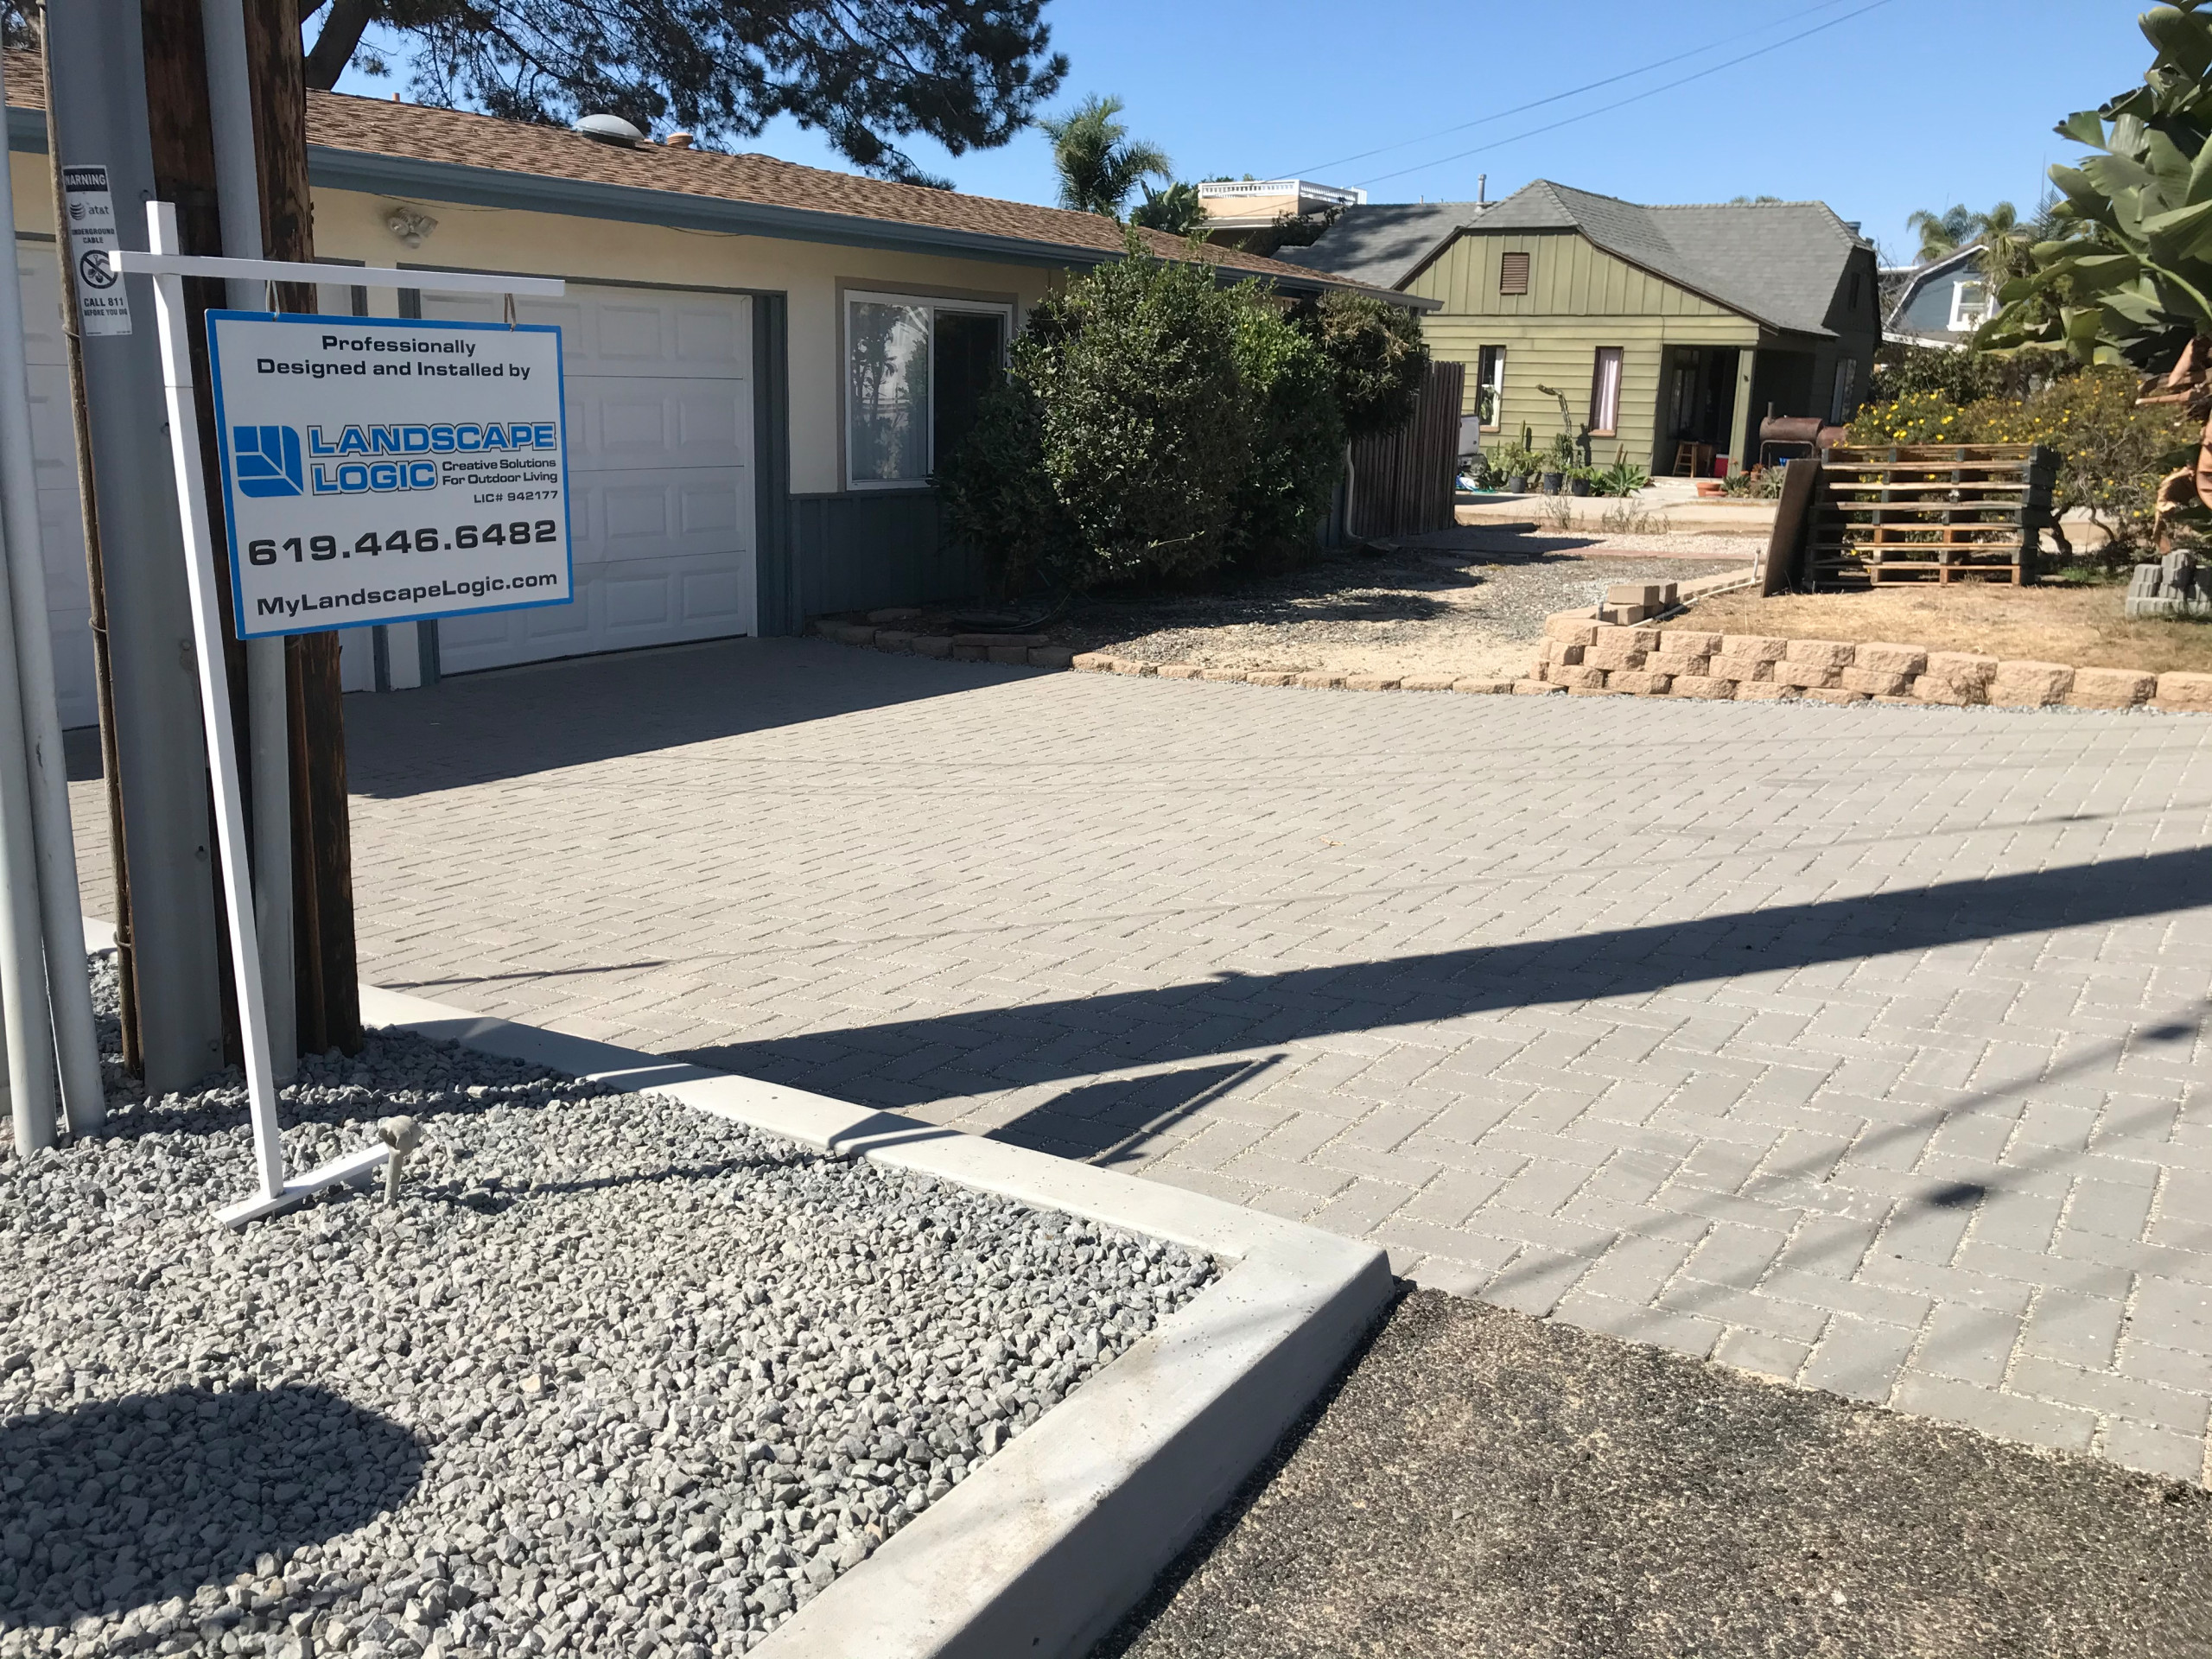 Paver Driveway Complete in Solana Beach